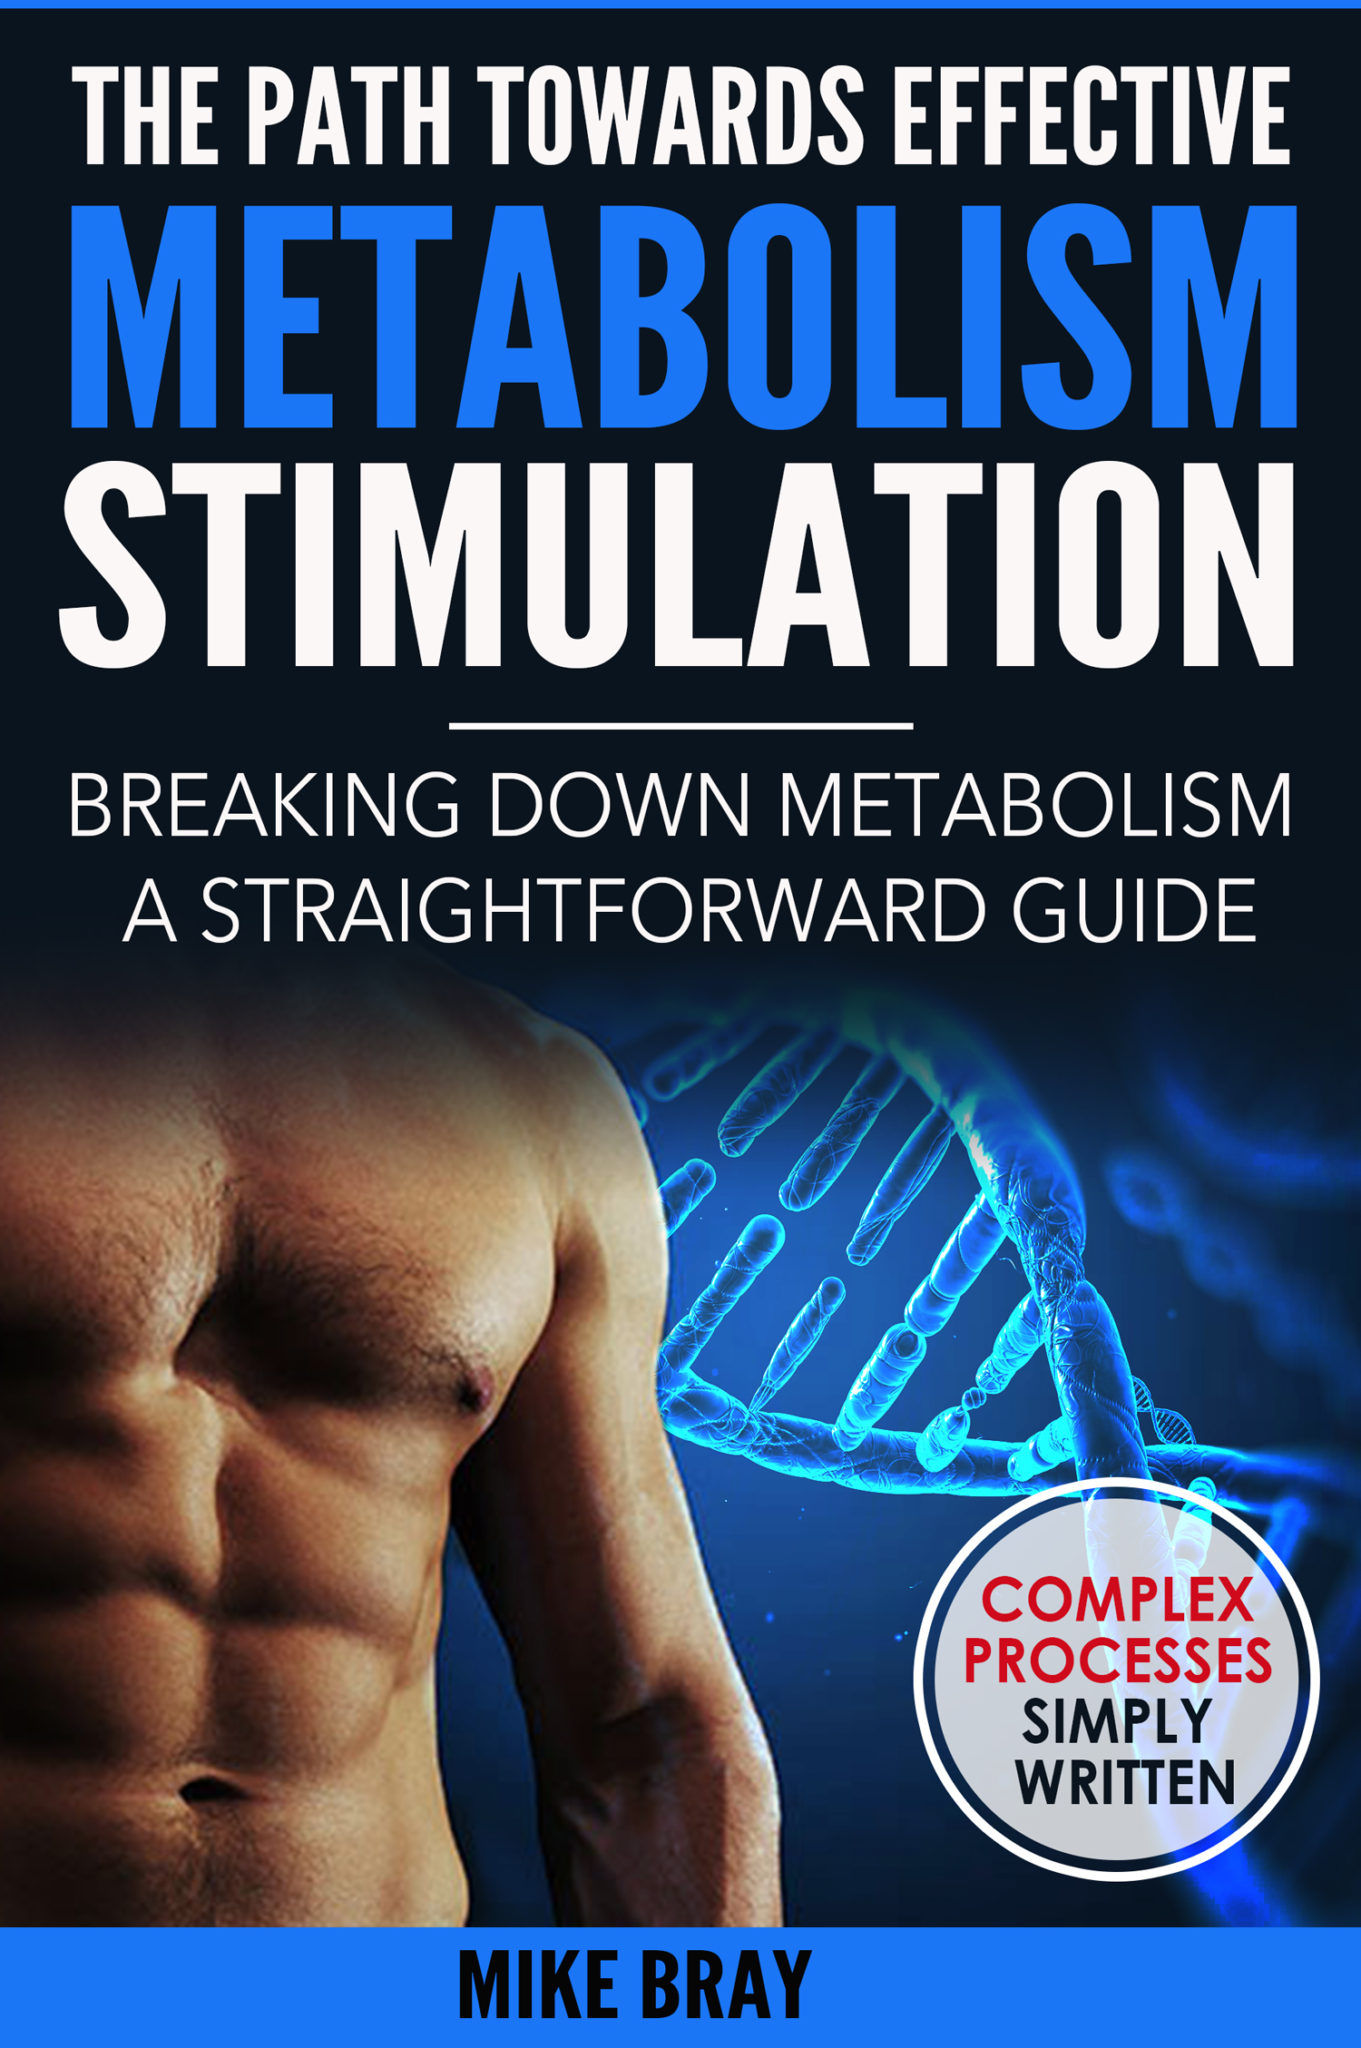 FREE: The Path Towards Effective Metabolism Stimulation by Mike bray